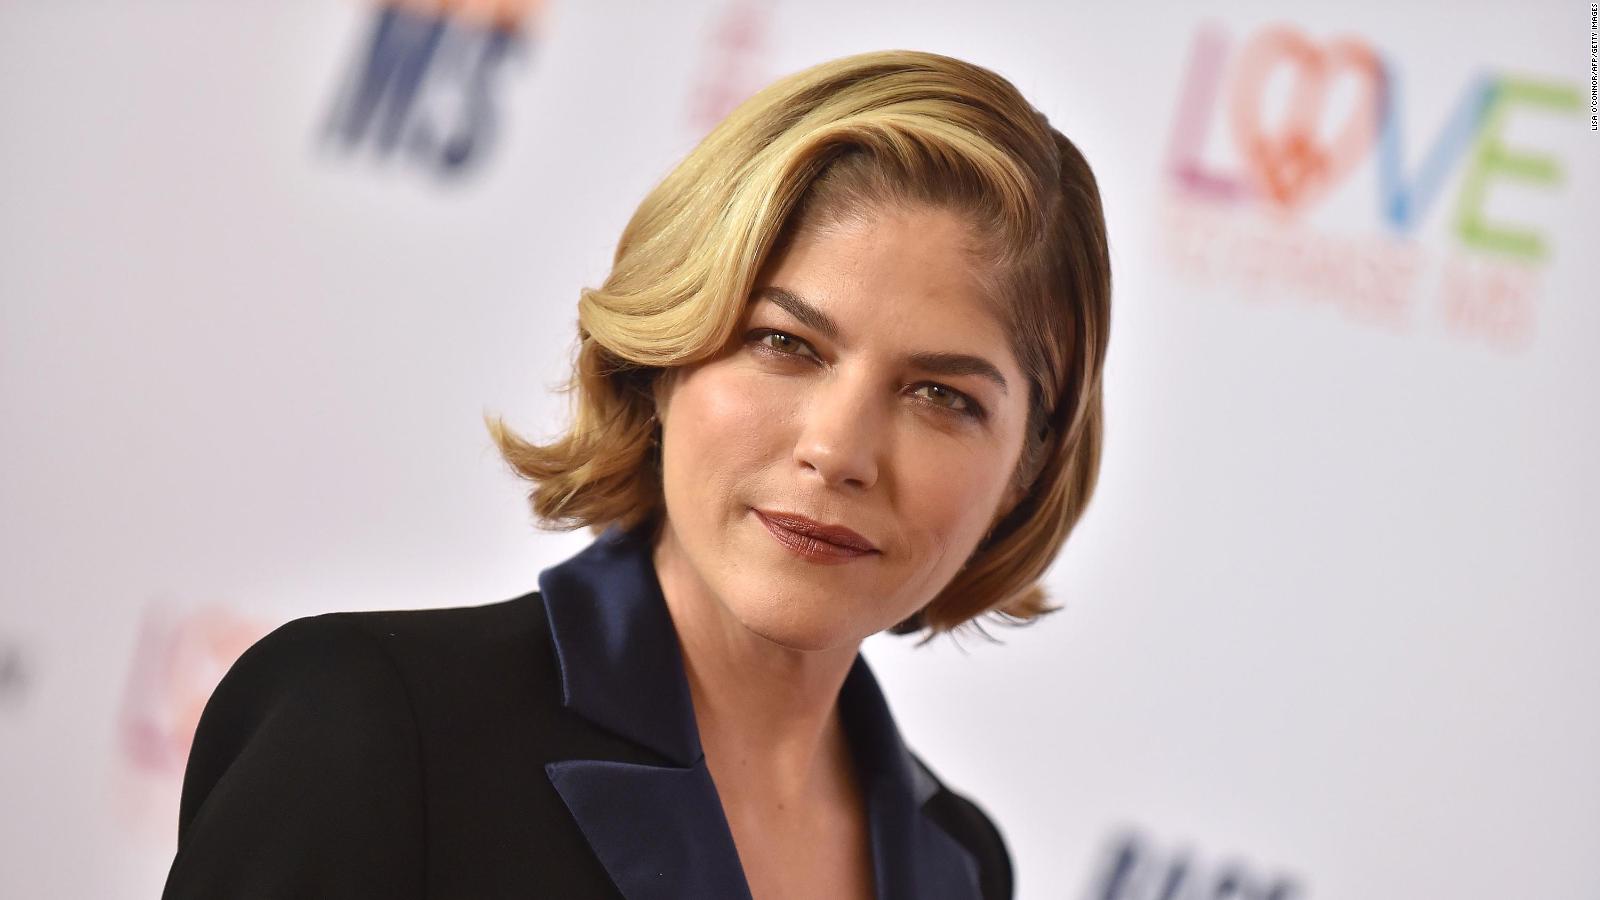 Selma Blair Opens Up About Life With Multiple Sclerosis In Emotional 7988